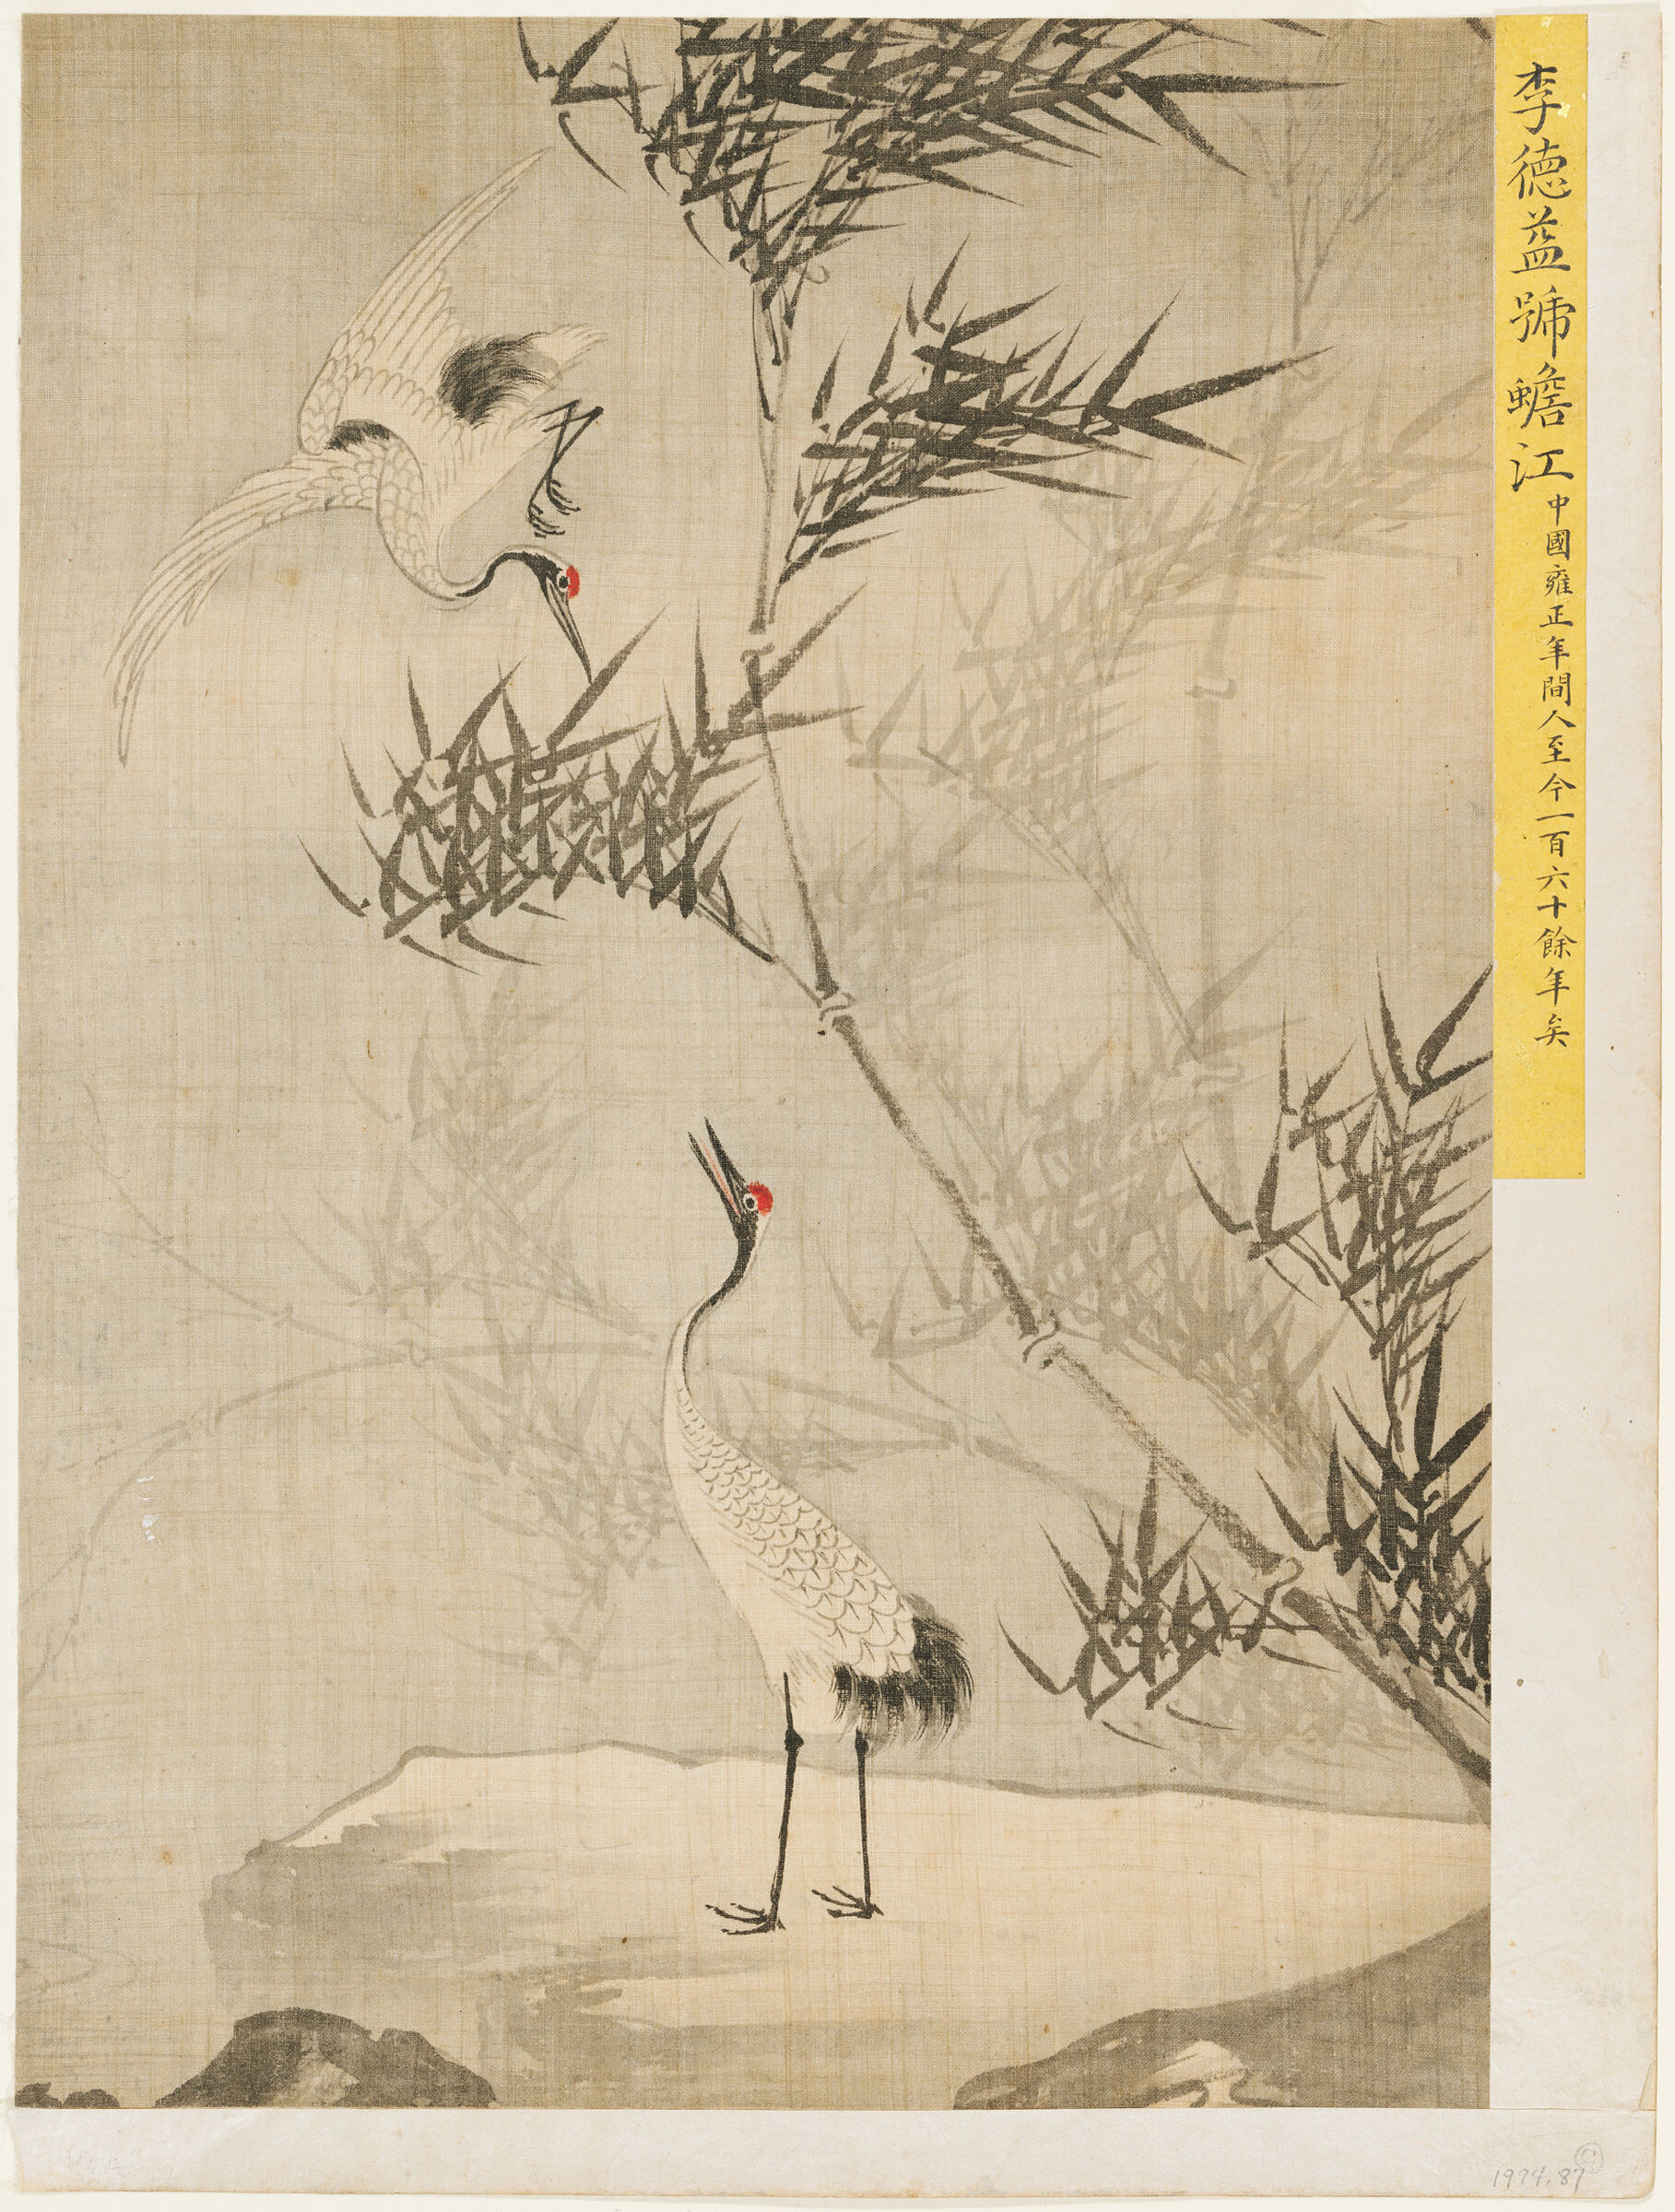 Two Manchurian Cranes Amidst A Lakeside Stand Of Mist-Enshrouded Bamboo